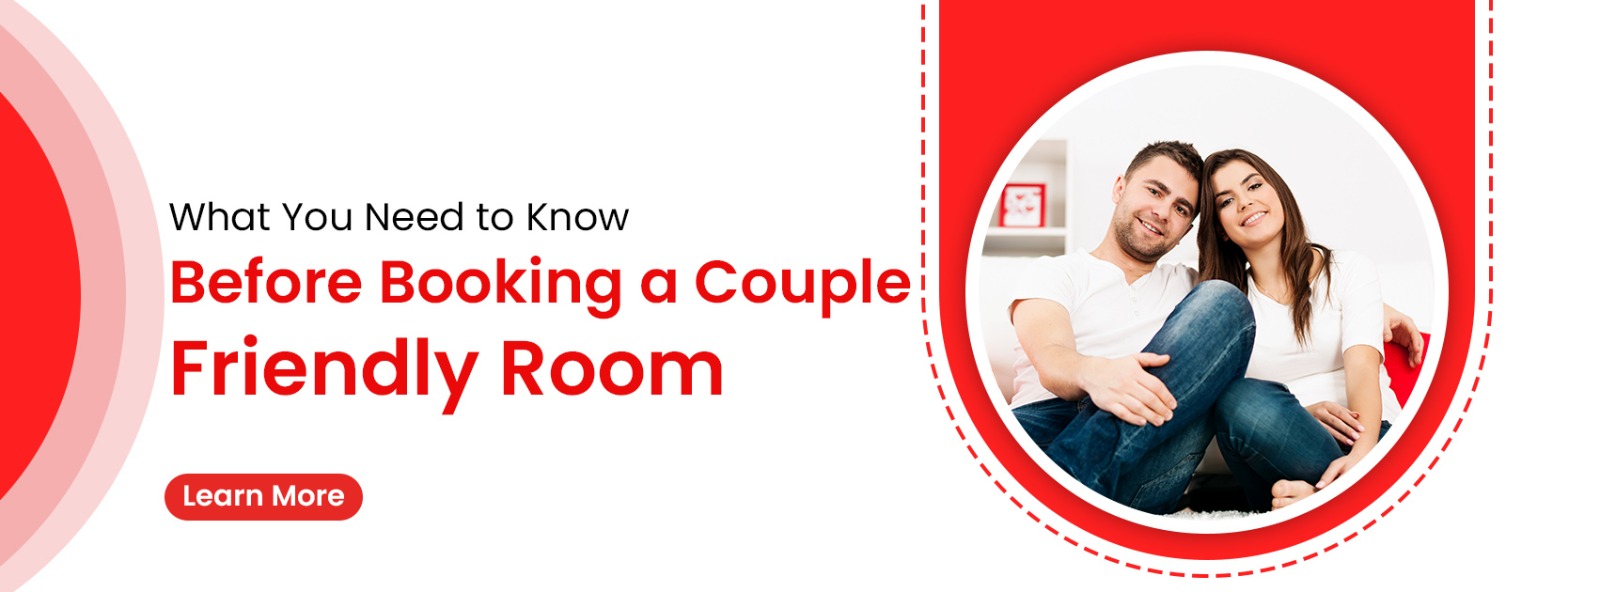 What You Need to Know Before Booking a Couple Friendly Room